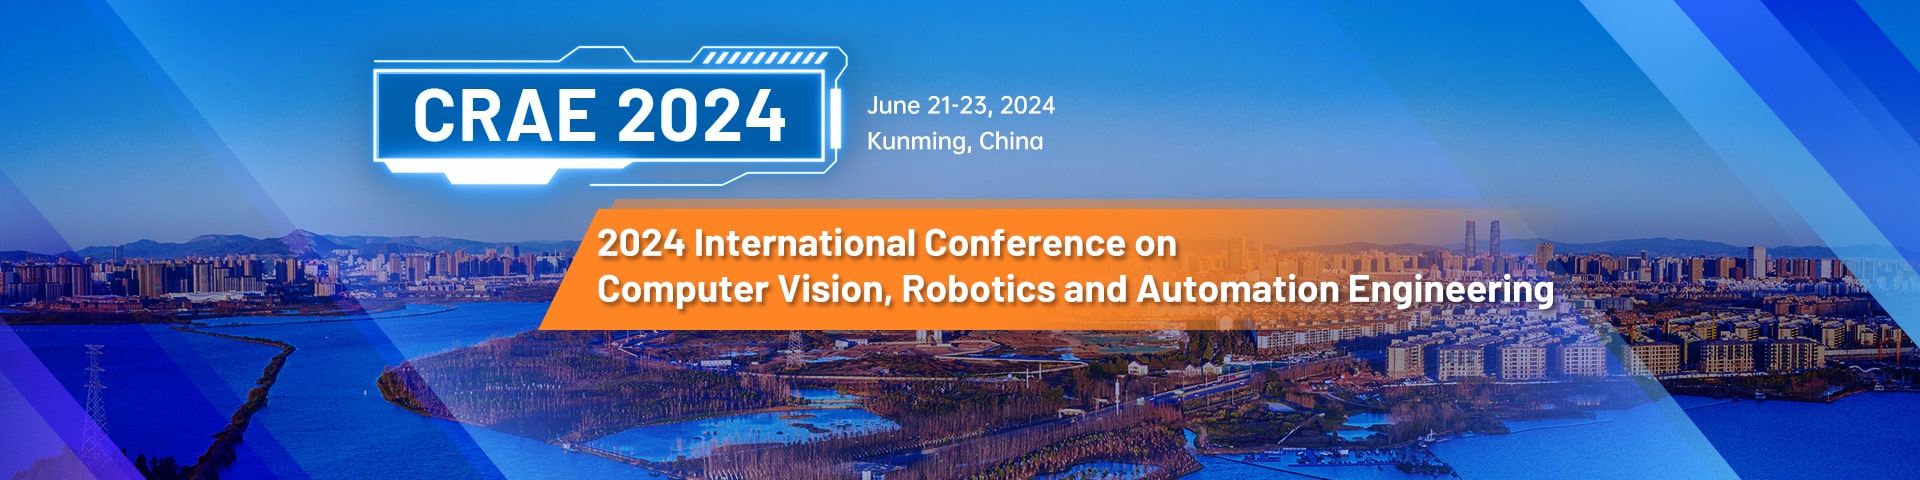 2024 International Conference on Computer Vision, Robotics and Automation Engineering(CRAE 2024)